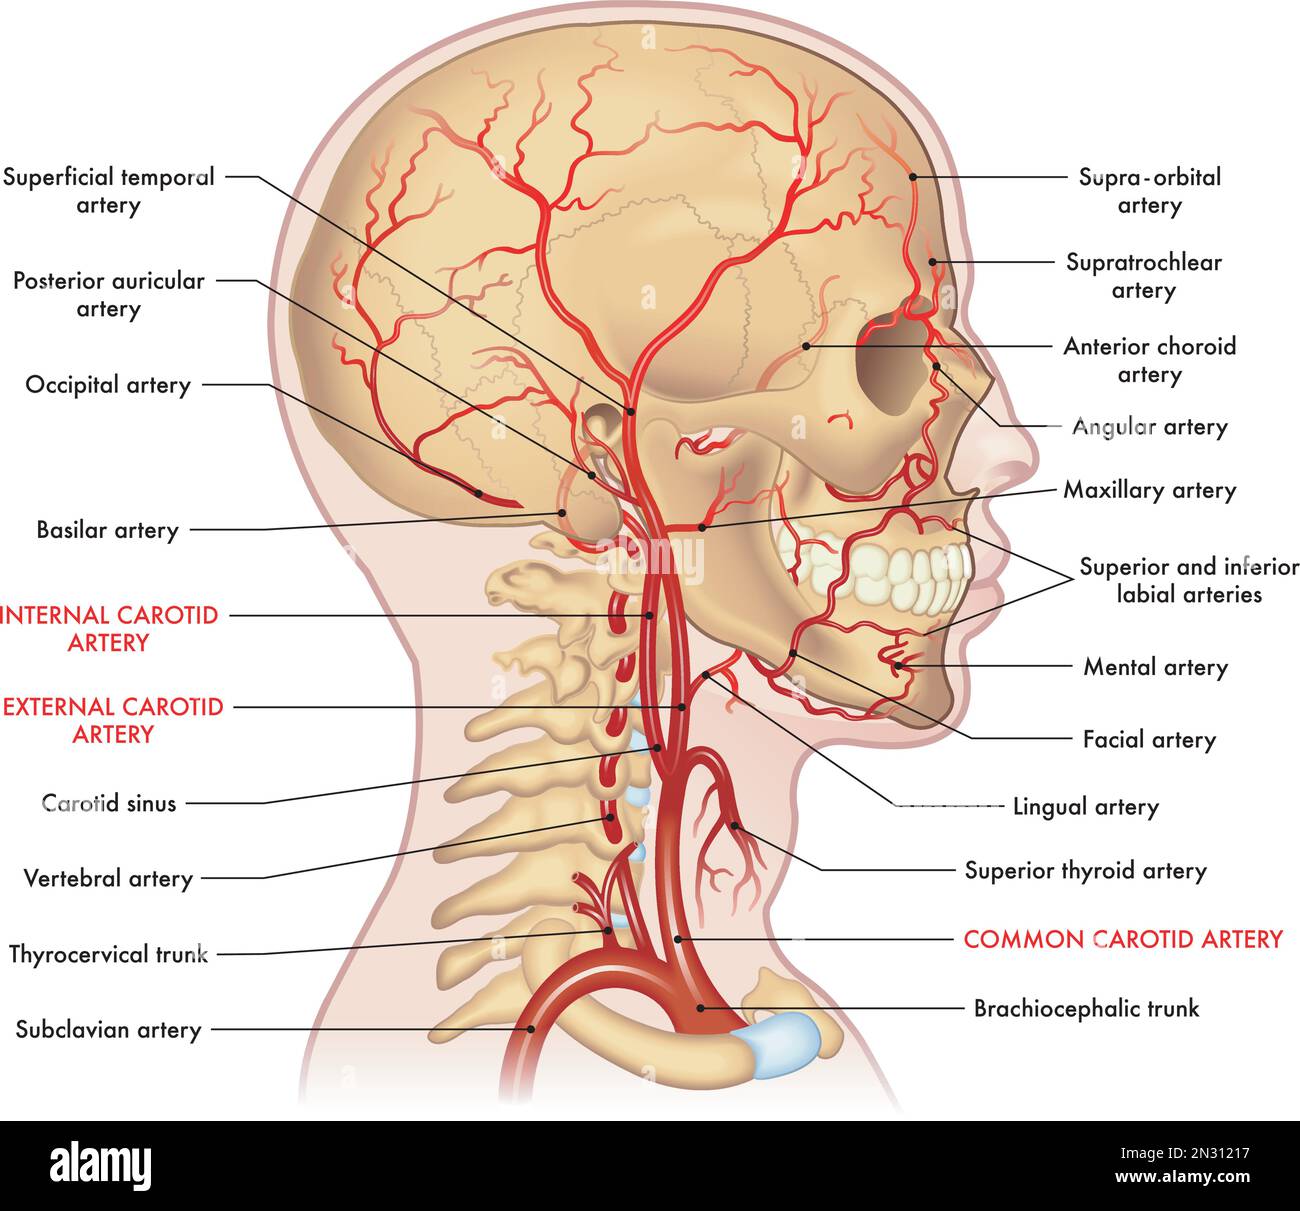 Medical illustration of the major arteries of the head and neck, with annotations. Stock Vector